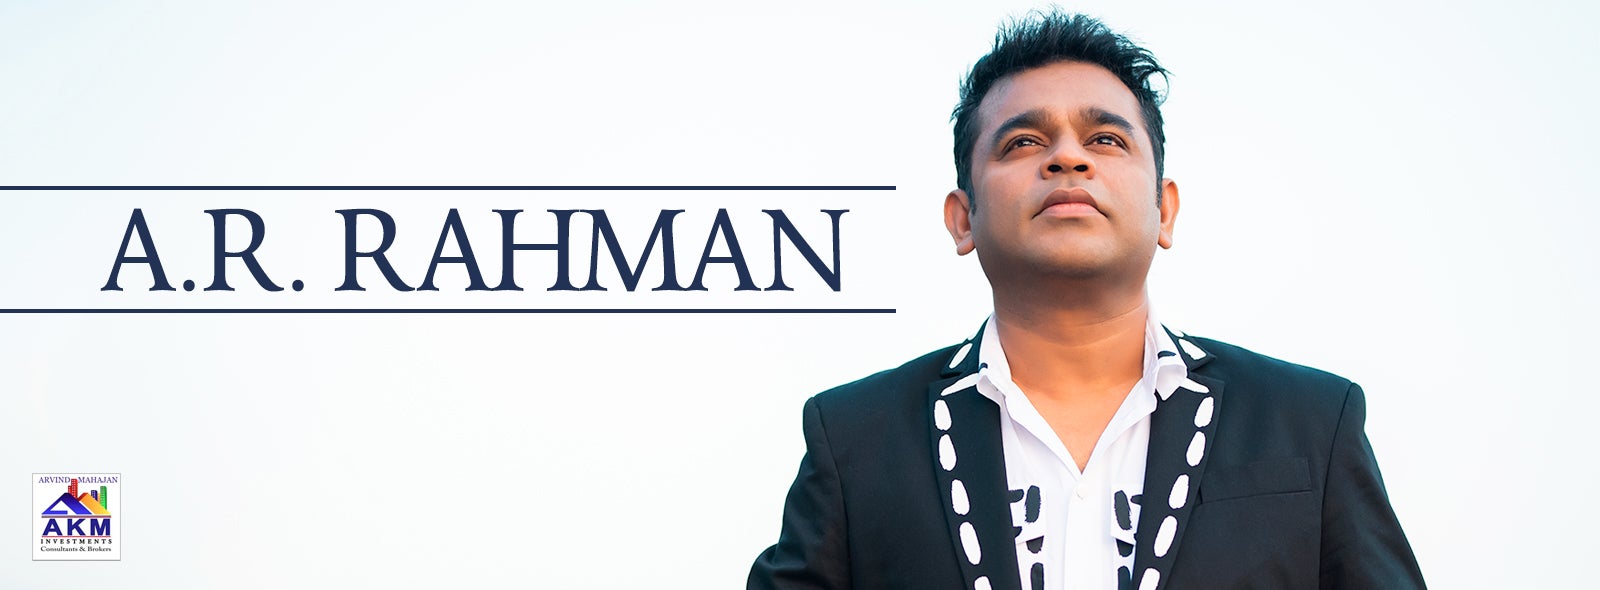 A R Rahman Comes To Dpac On June 13 2020 Dpac Official Site